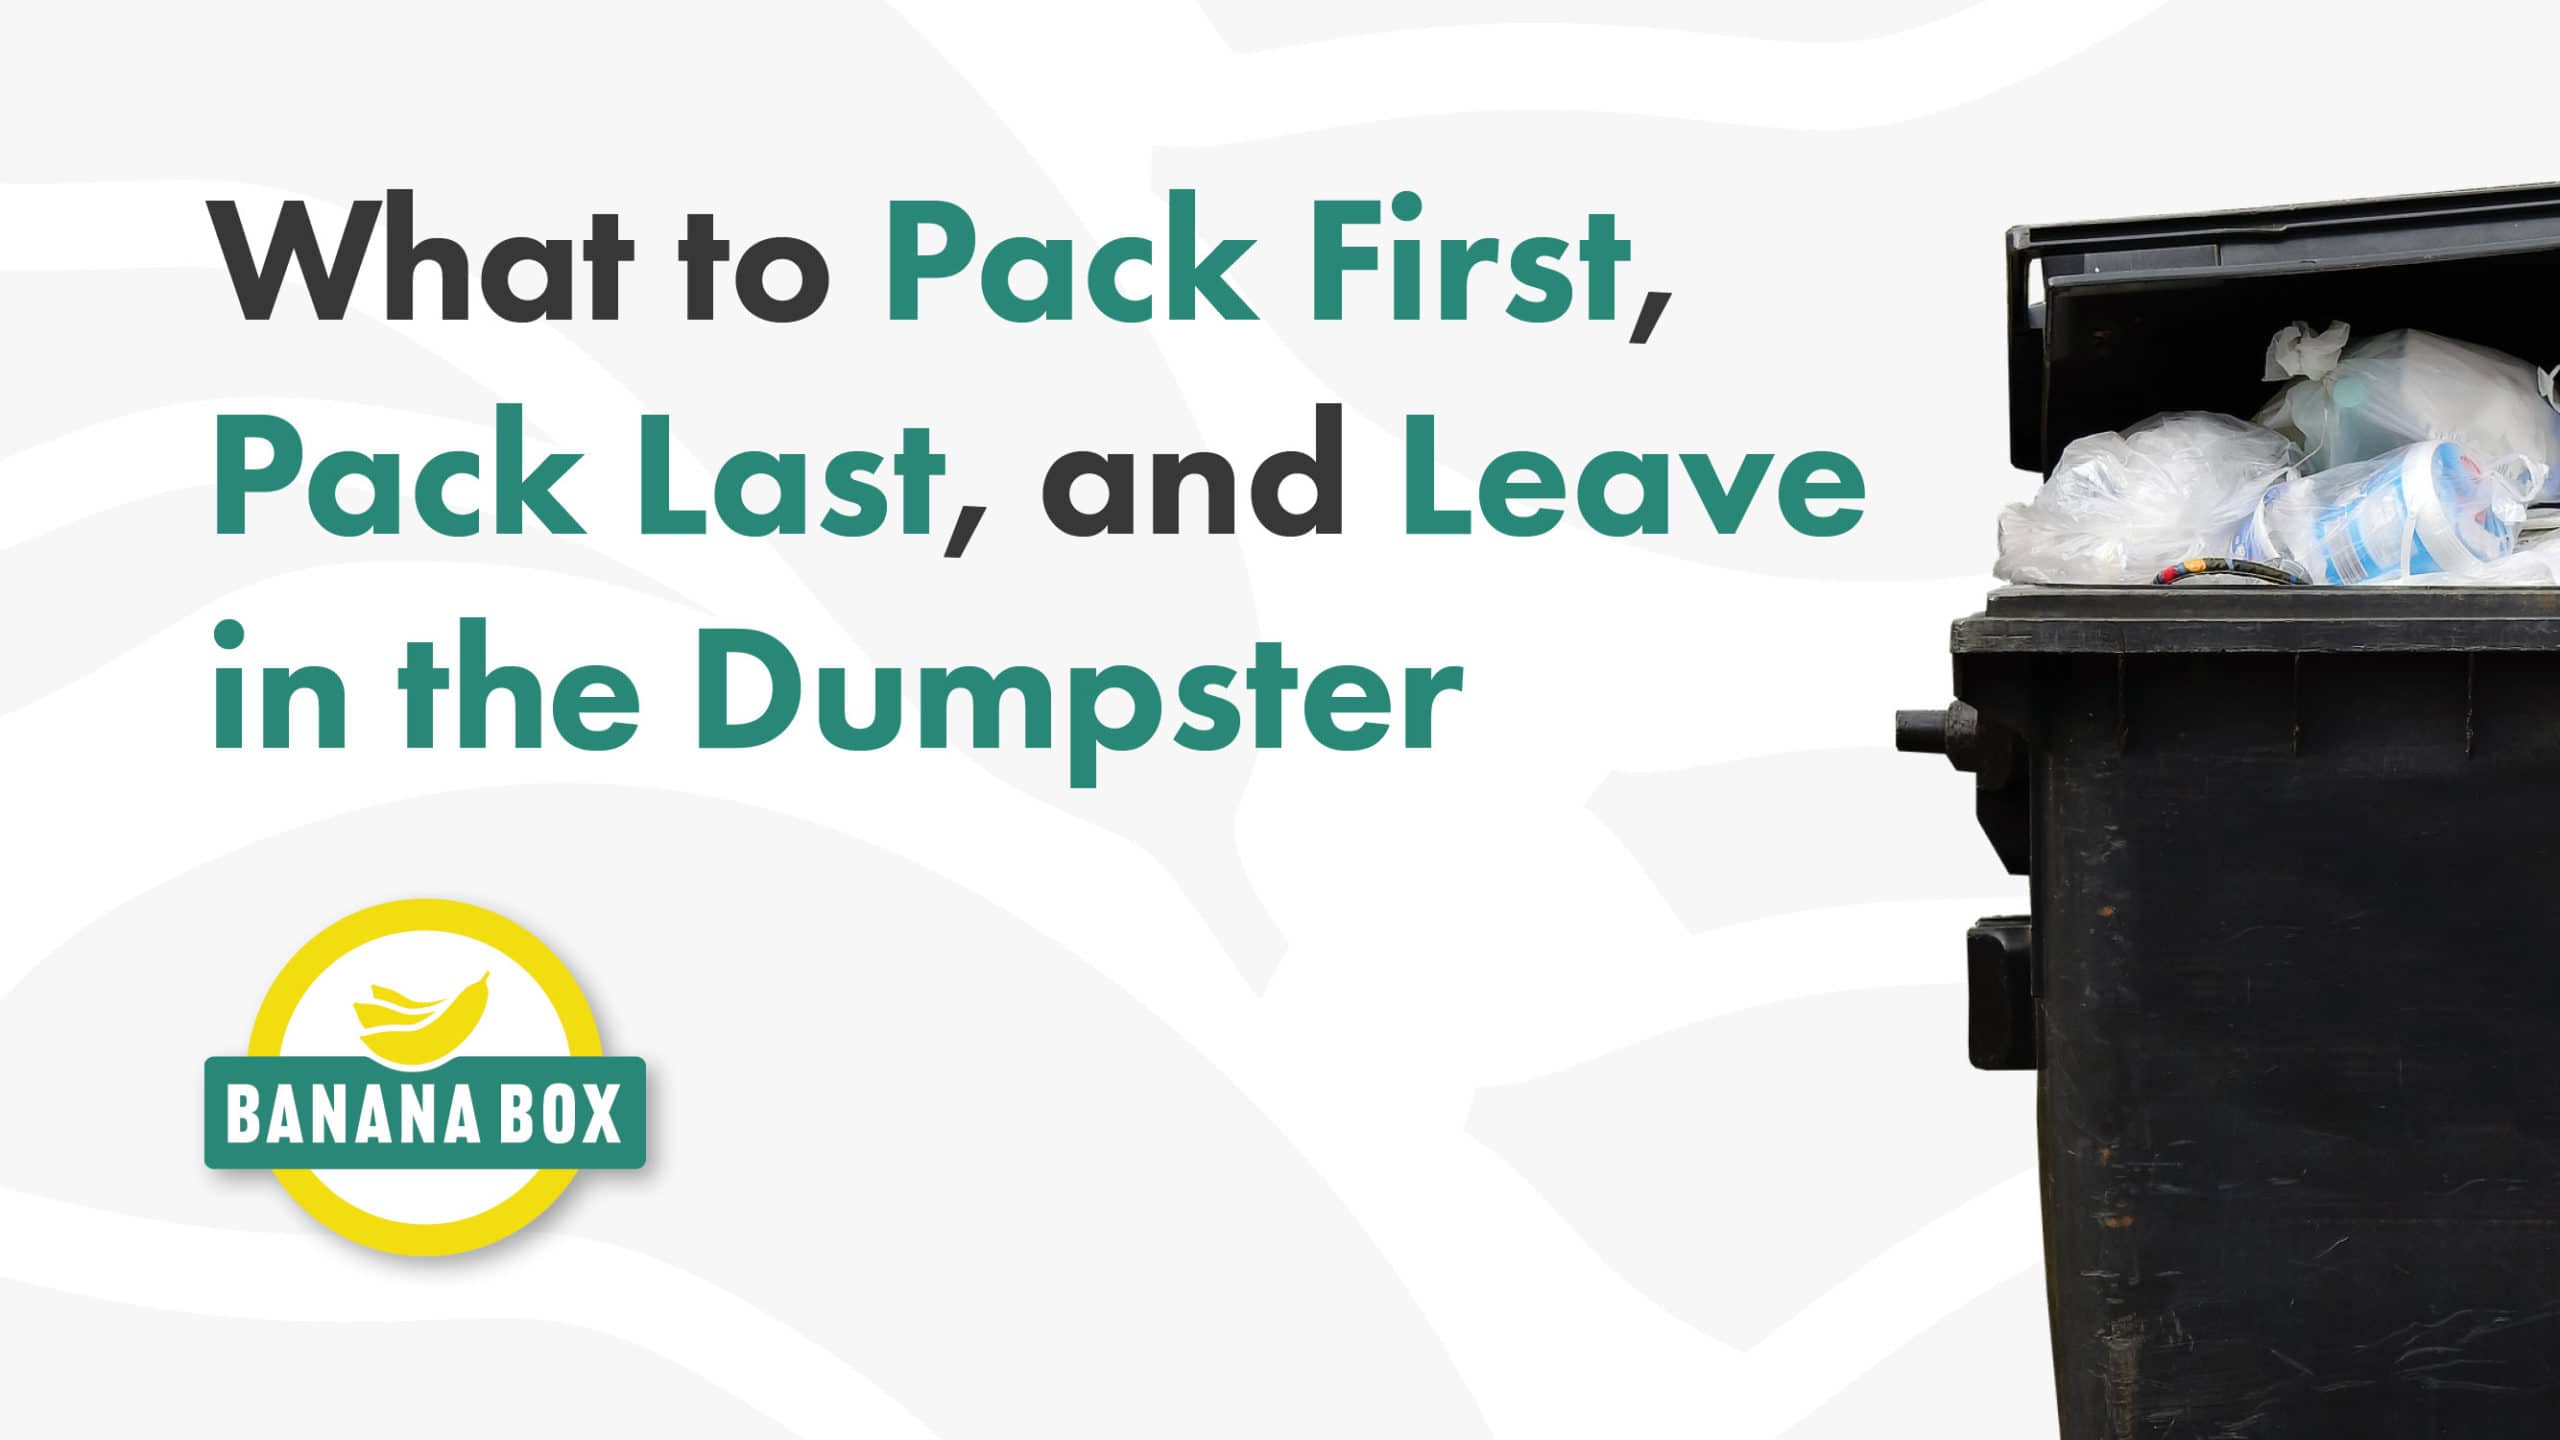 What to Pack First, Pack Last, and Leave in the Dumpster